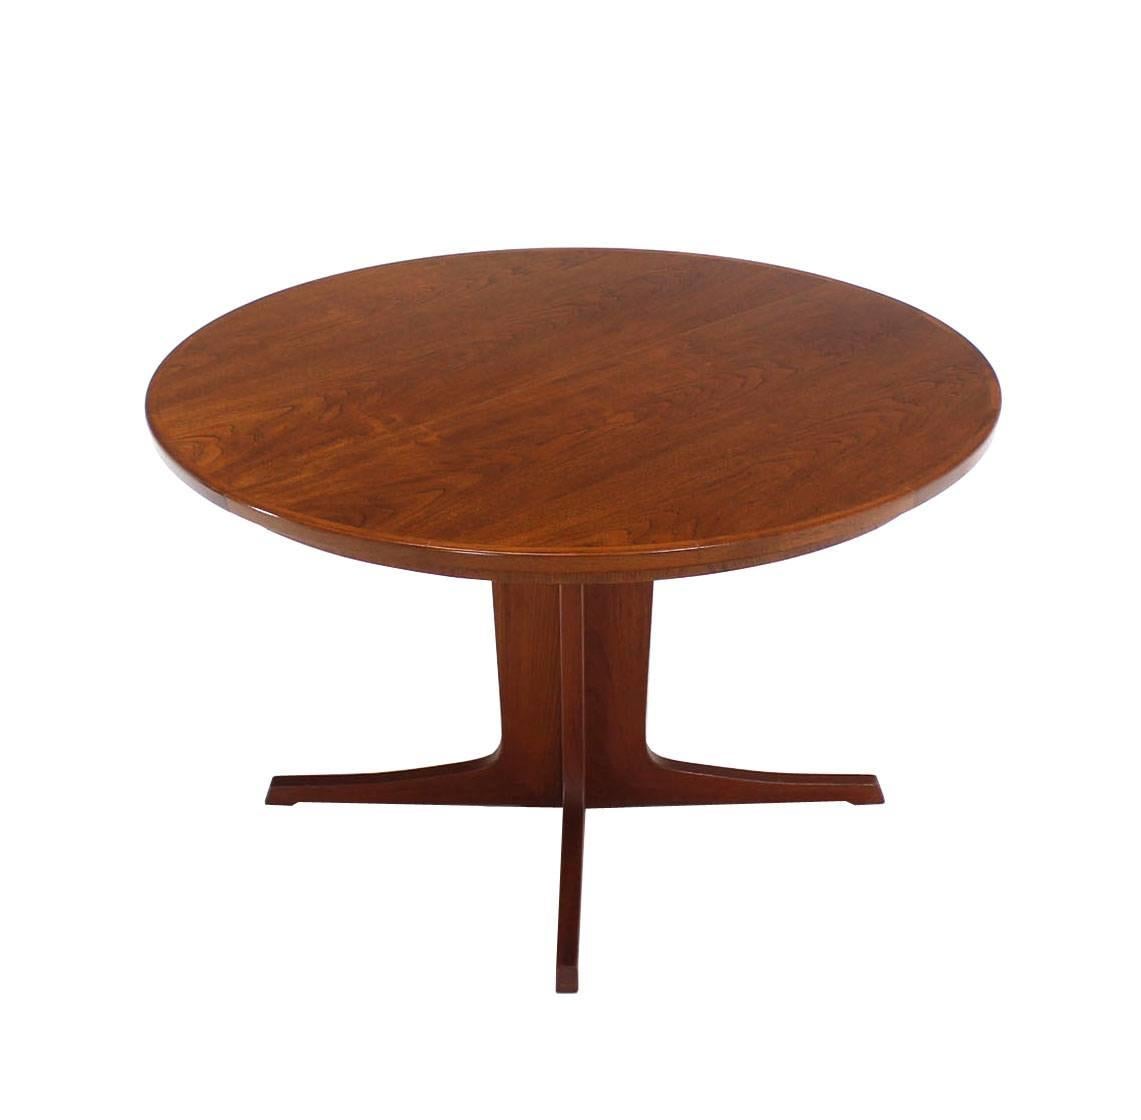 Round Danish Mid-Century Modern Teak Dining Table with Two Leaves 3